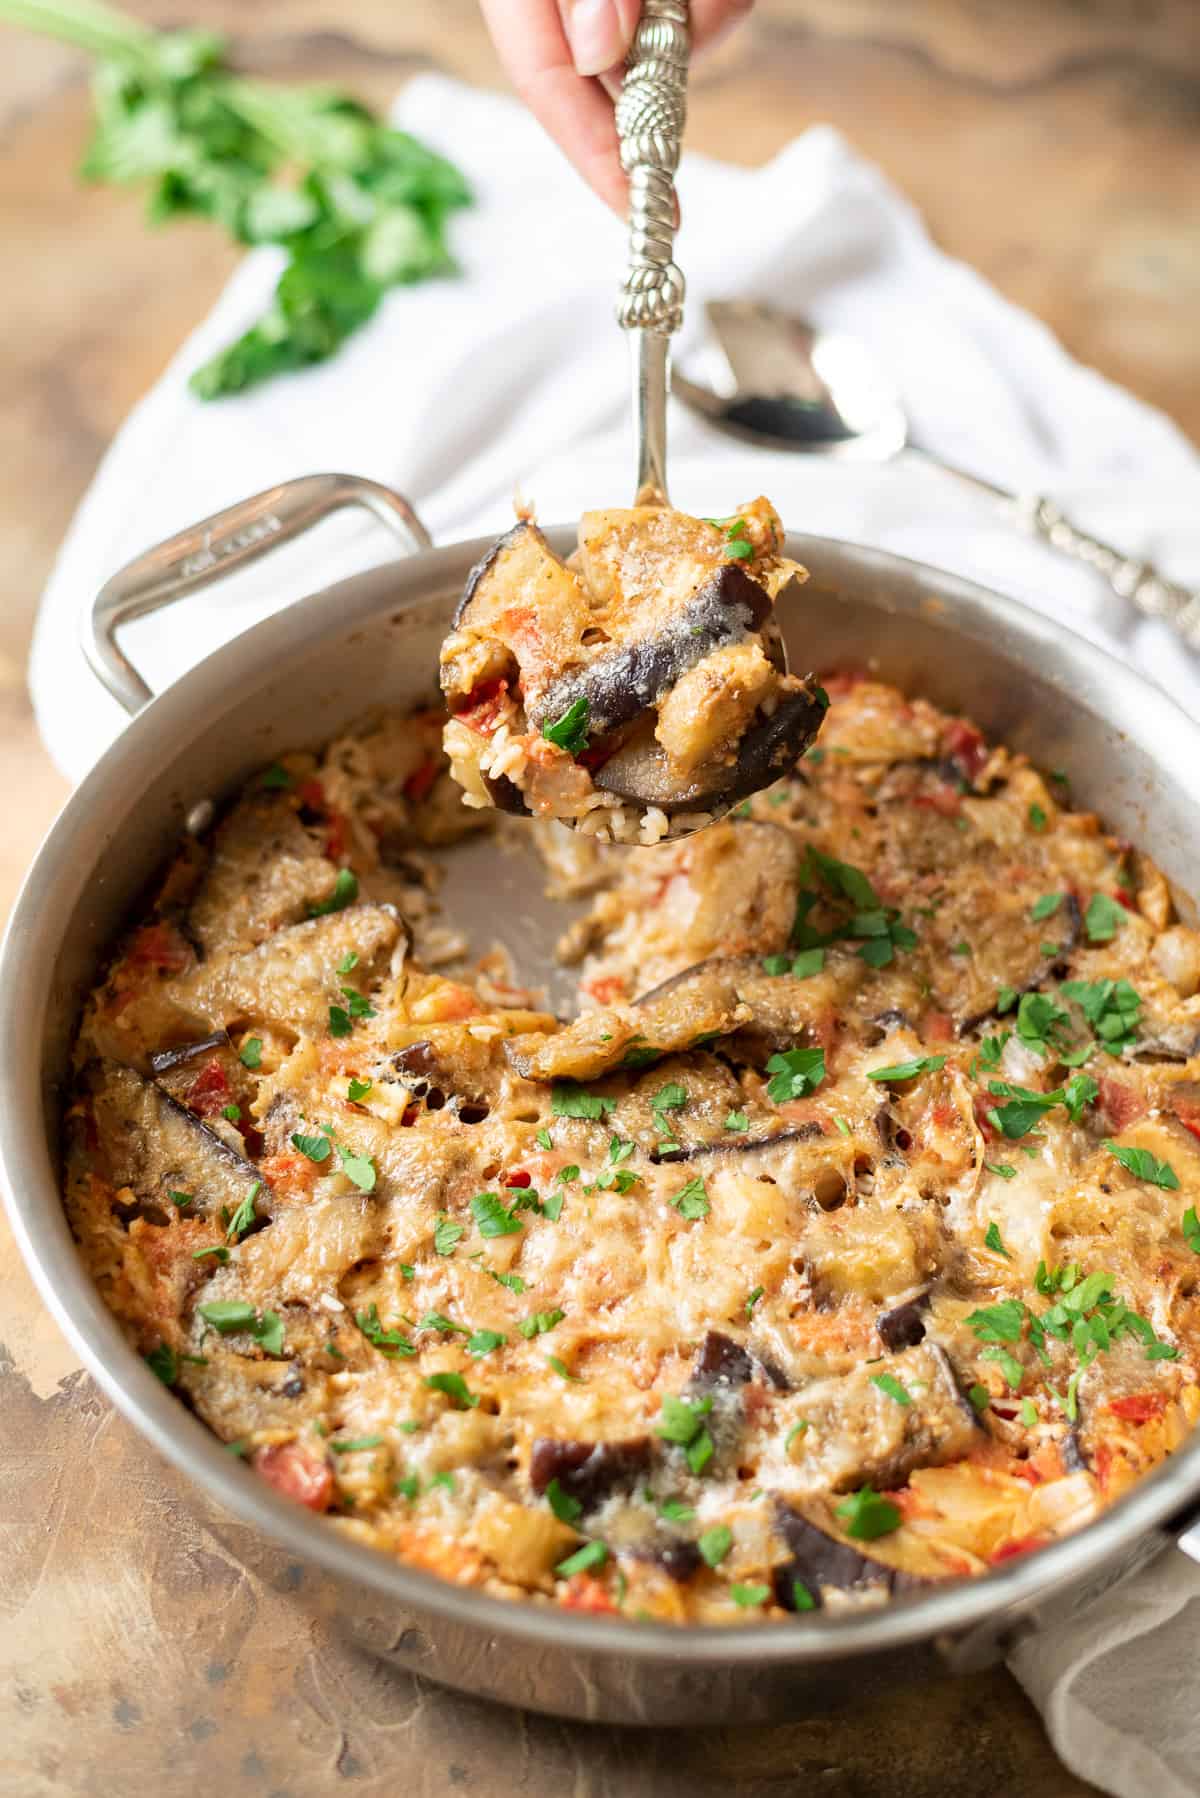 A hand holding a serving spoon with a scoop of baked eggplant and rice casserole.